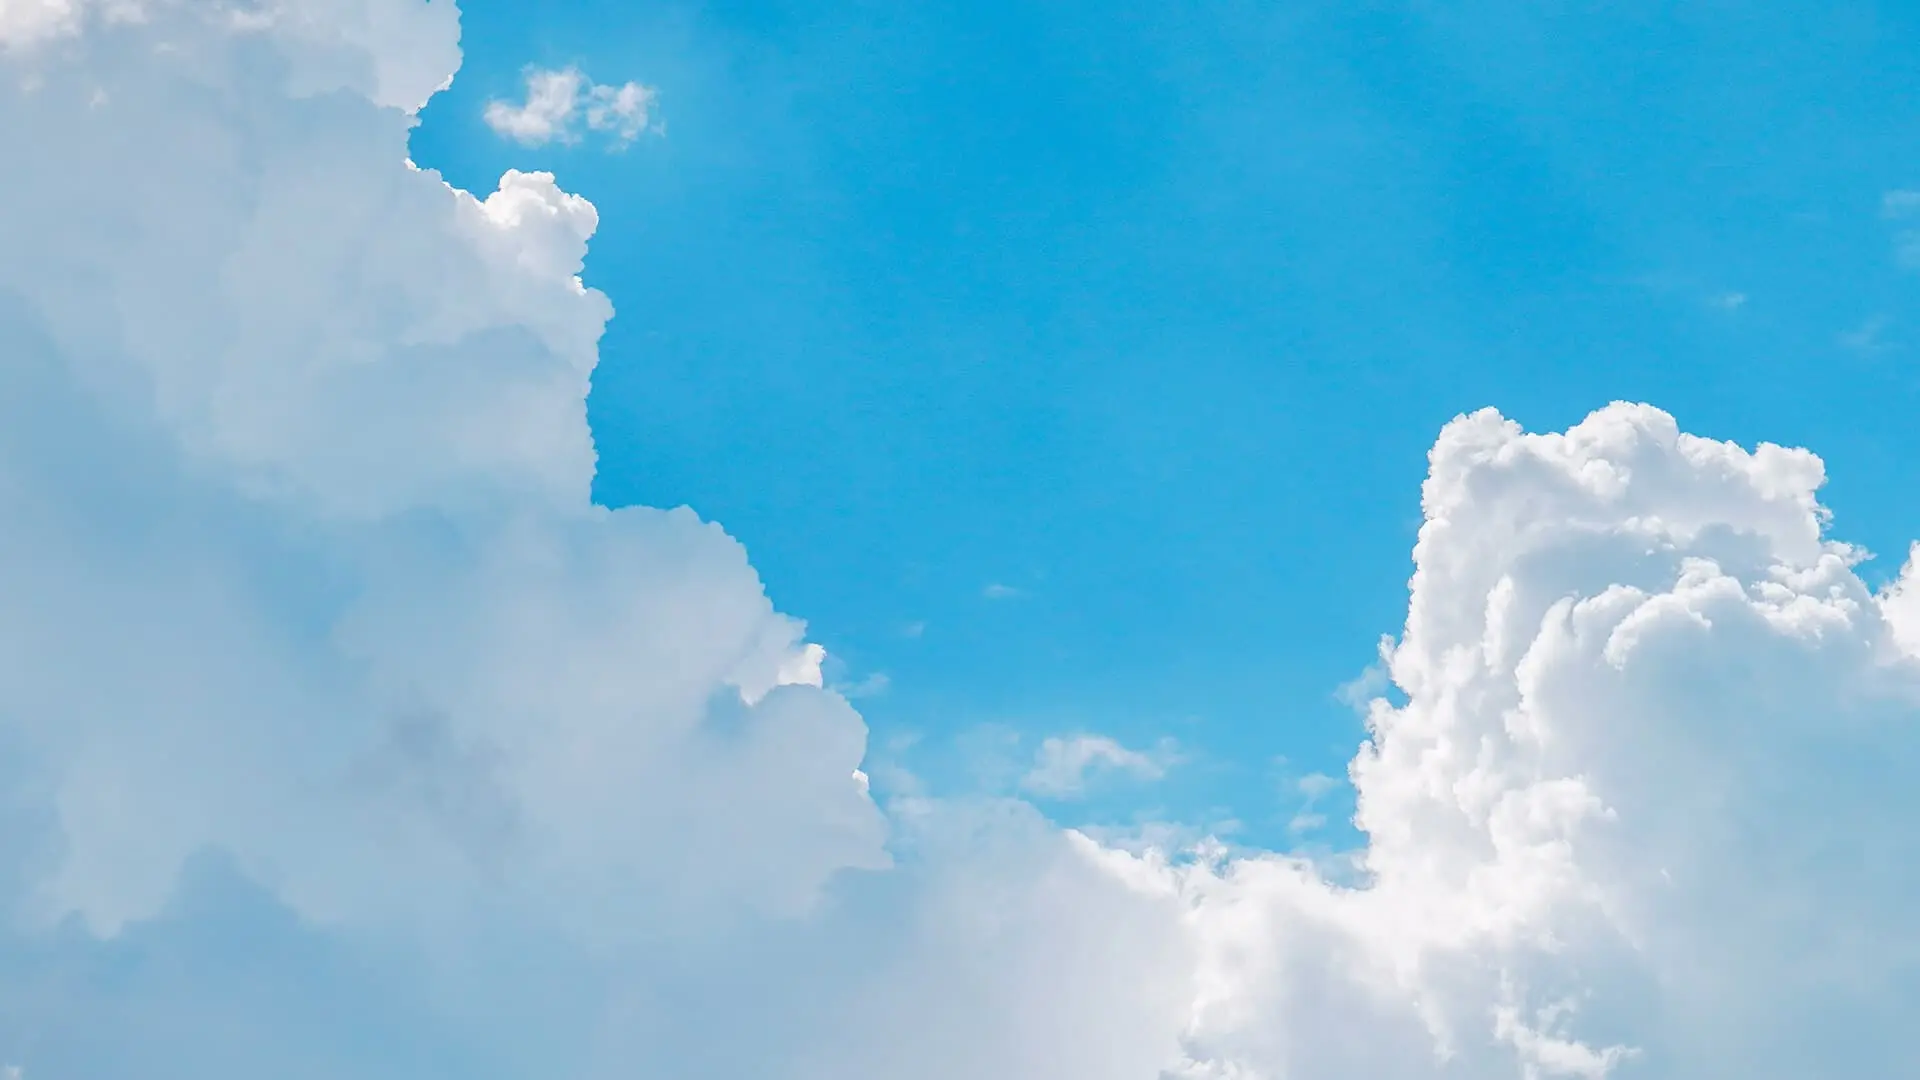 Background image of clouds - Pringle Legal Search